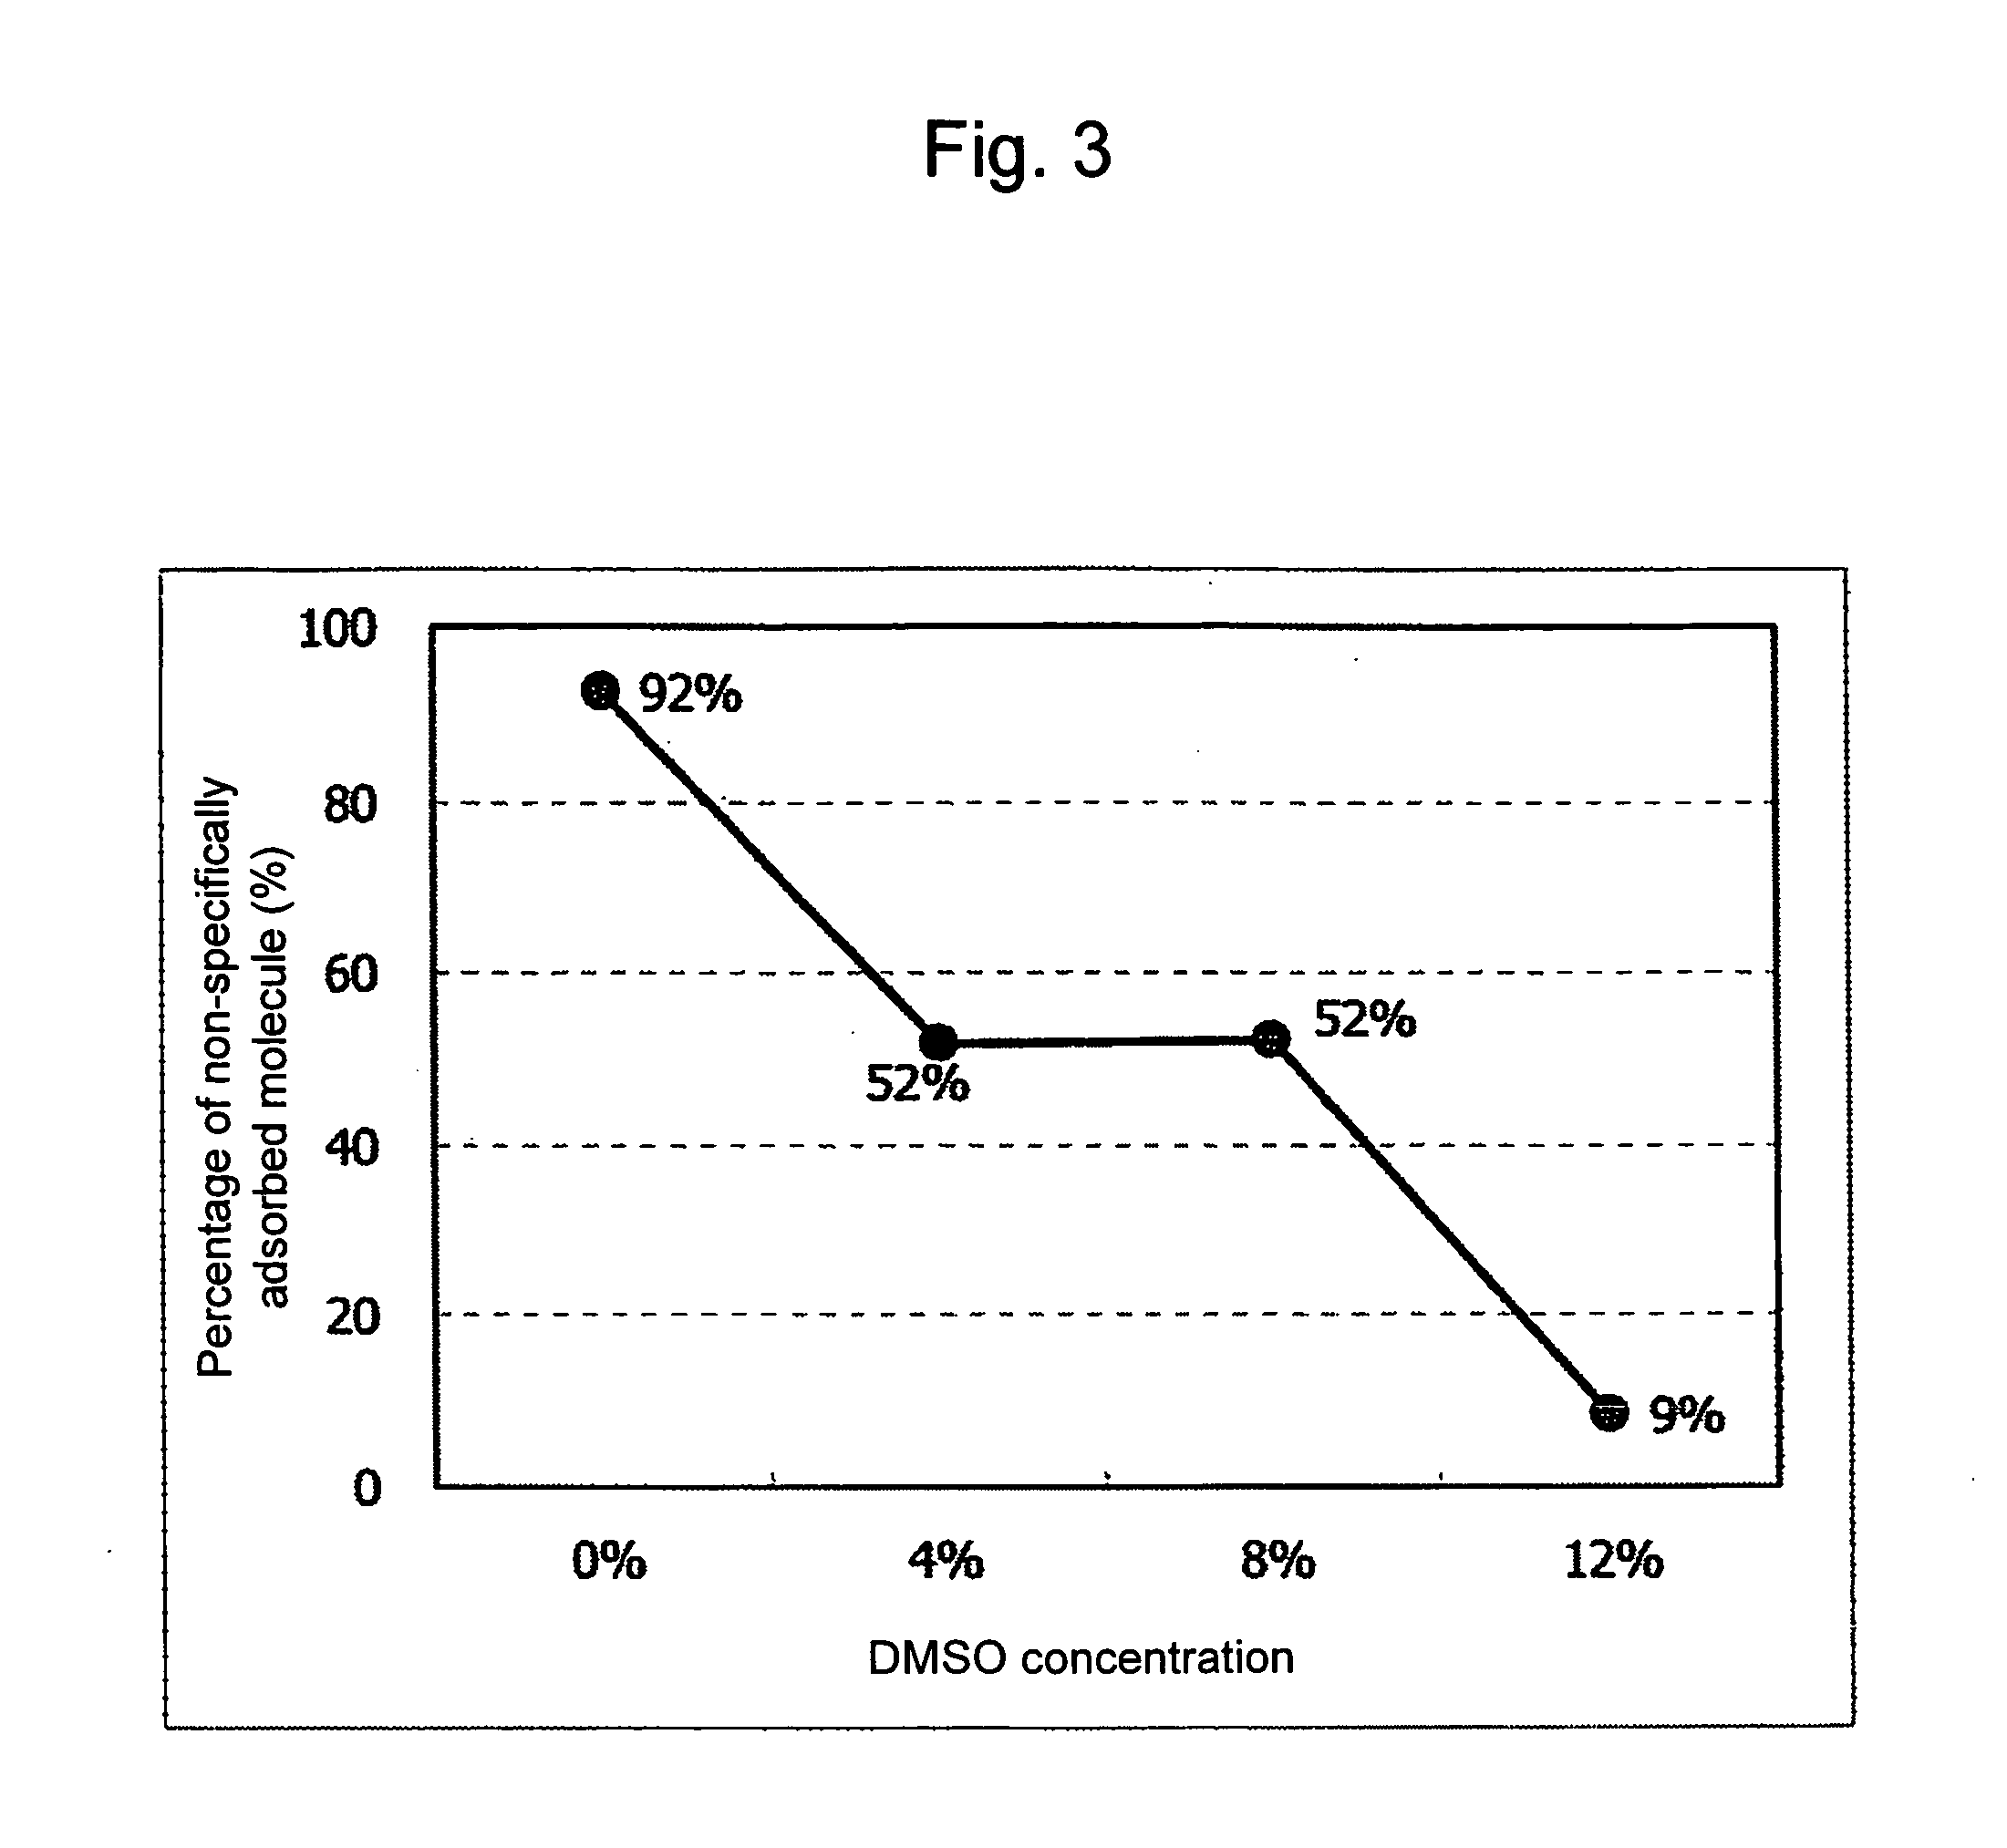 Large-scale parallel nucleic acid analysis method